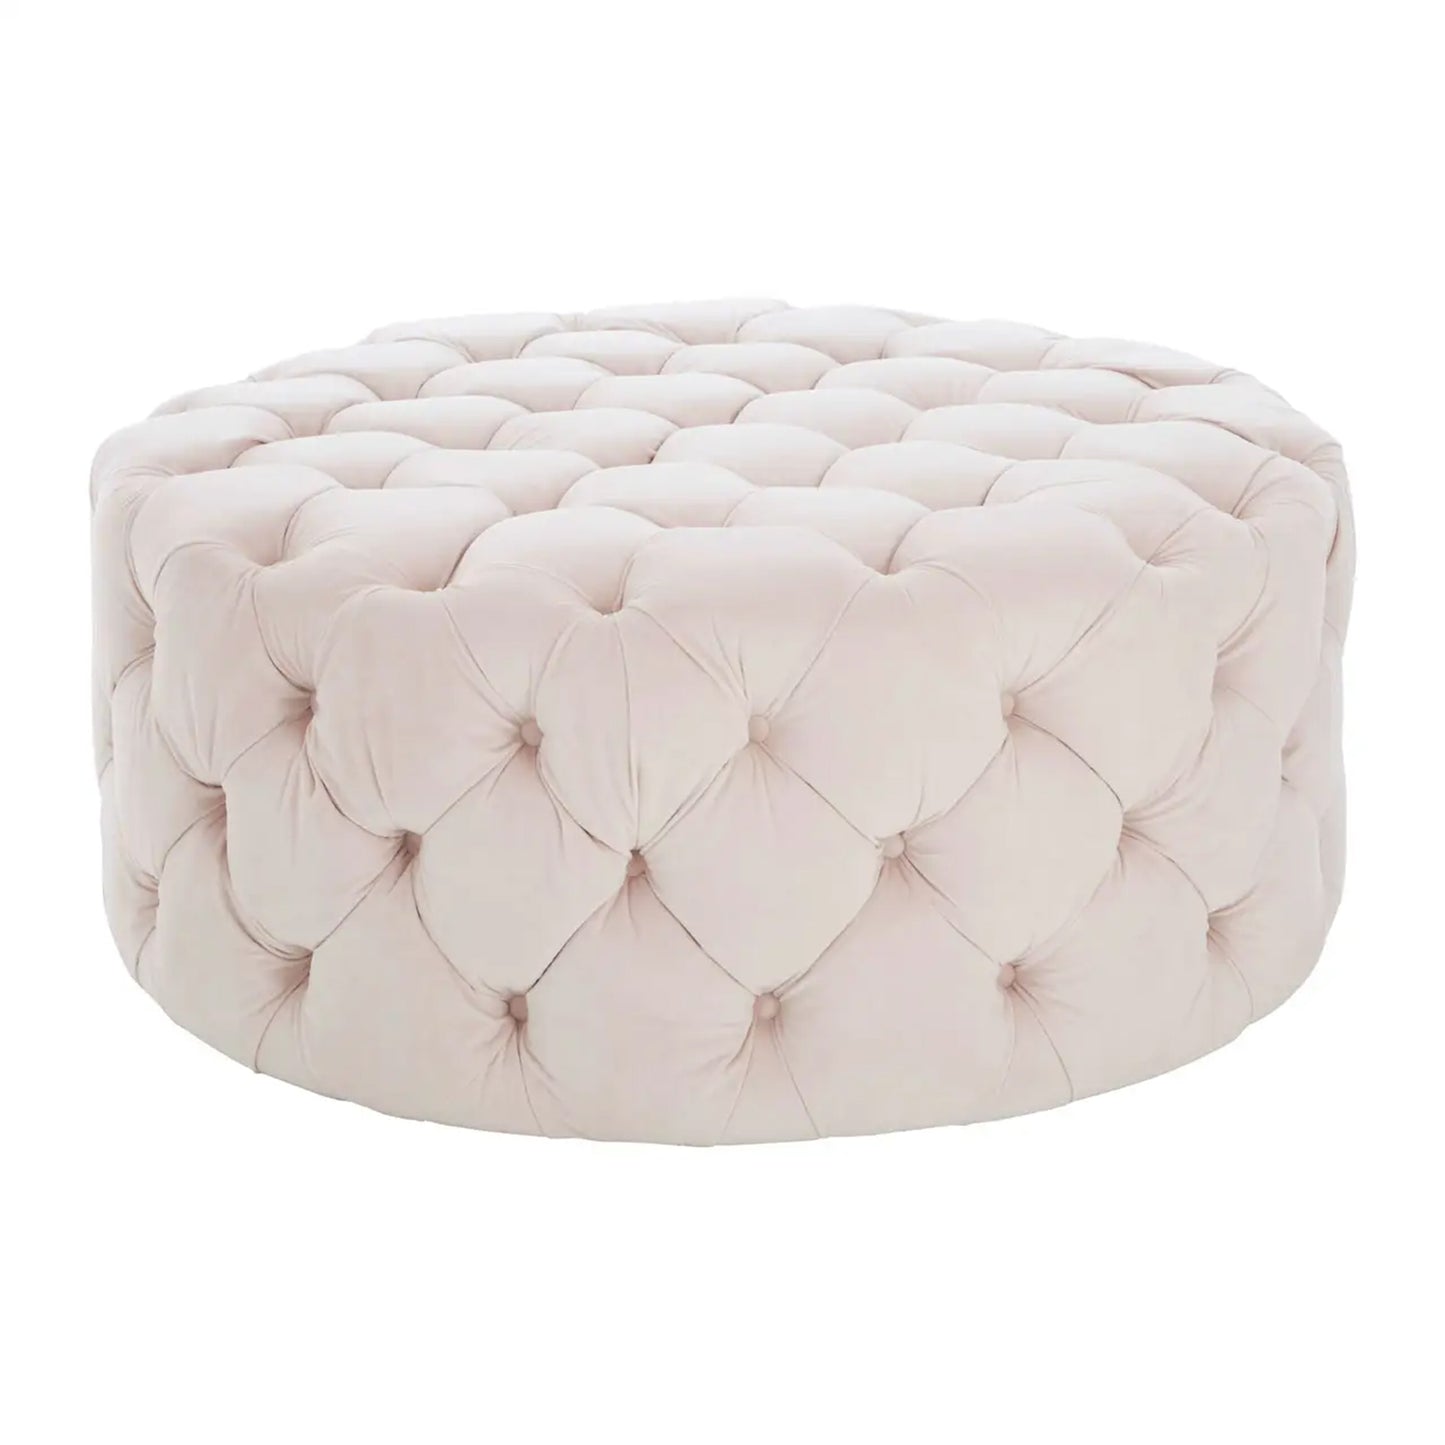 Large Round Footstool in Neutral Blossom